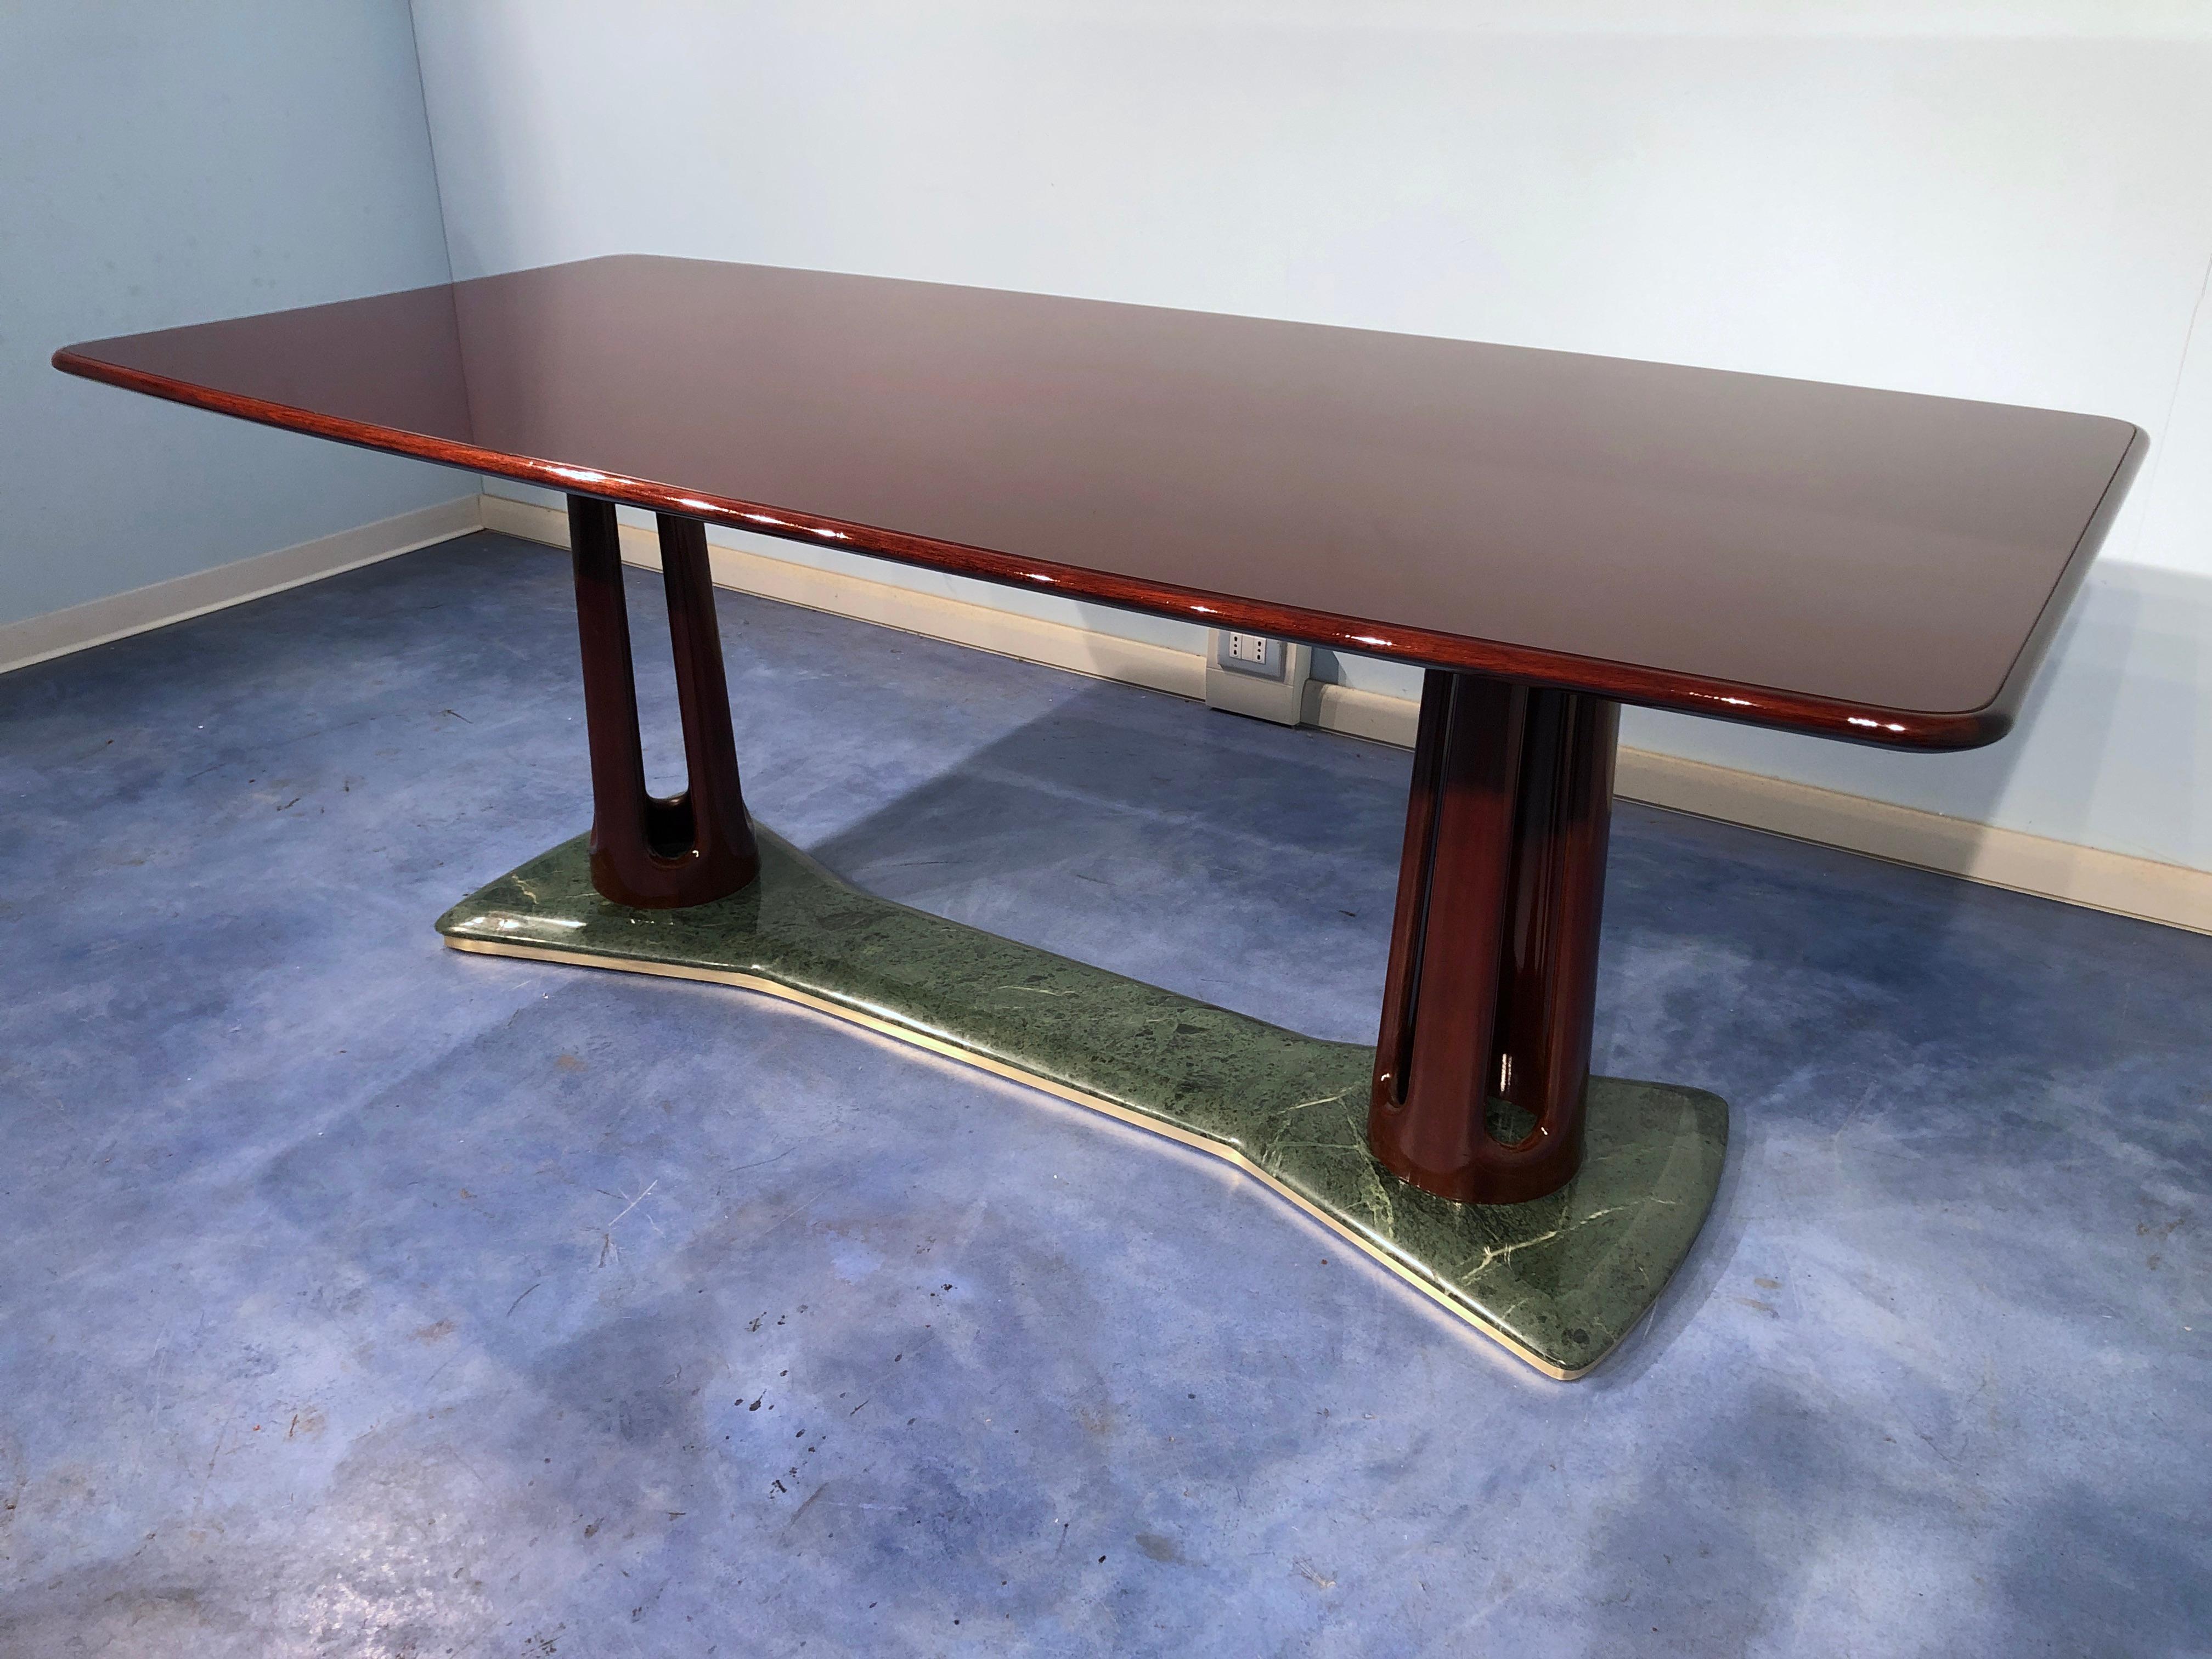 Italian Mid-Century Modern Dining Table by Vittorio Dassi, 1950s For Sale 2